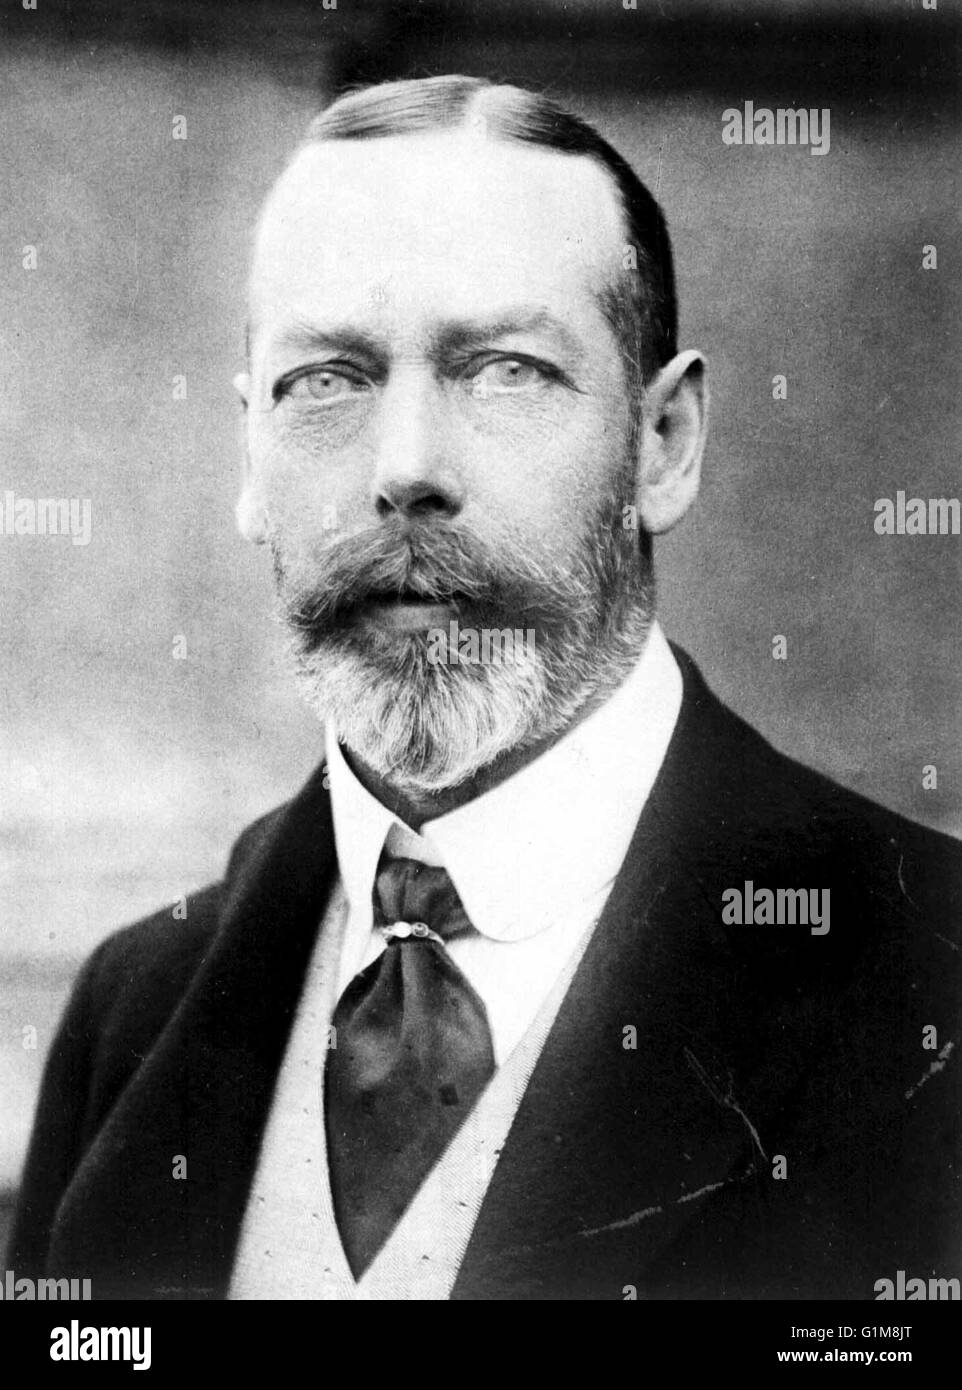 A portrait of King George V, King of Great Britain and Ireland, Emperor of India ... Royalty - King George V ... 01-01-1910 ... UK ... Photo credit should read: PA/Unique Reference No. 1173102 ... Stock Photo